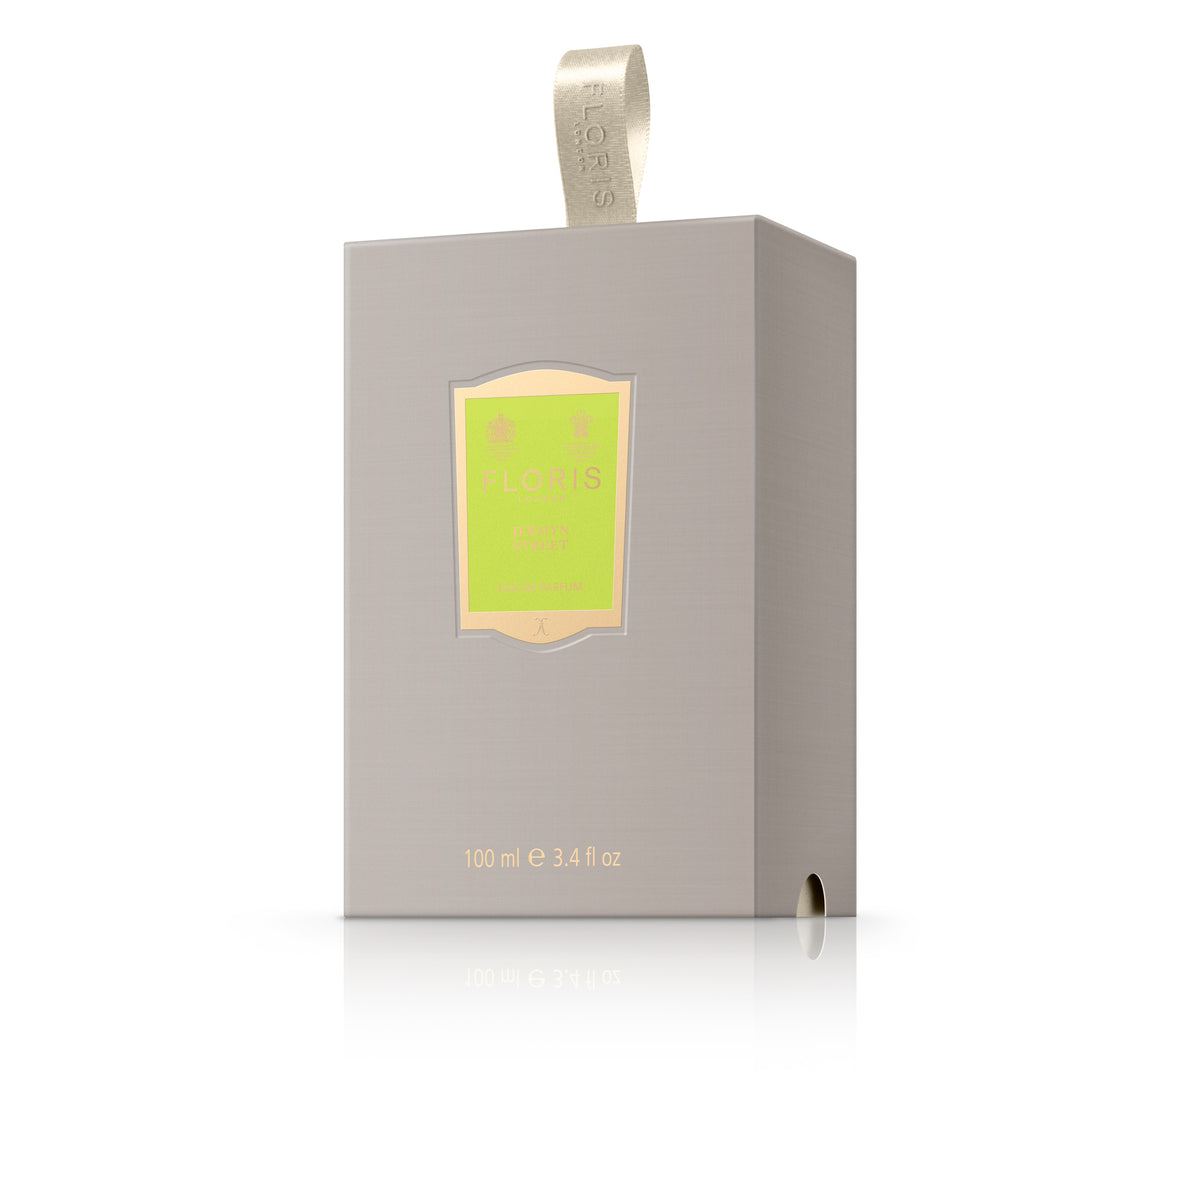 A grey box with a green label containing FLORIS Jermyn Street 100 ML fragrance, from KirbyAllison.com.